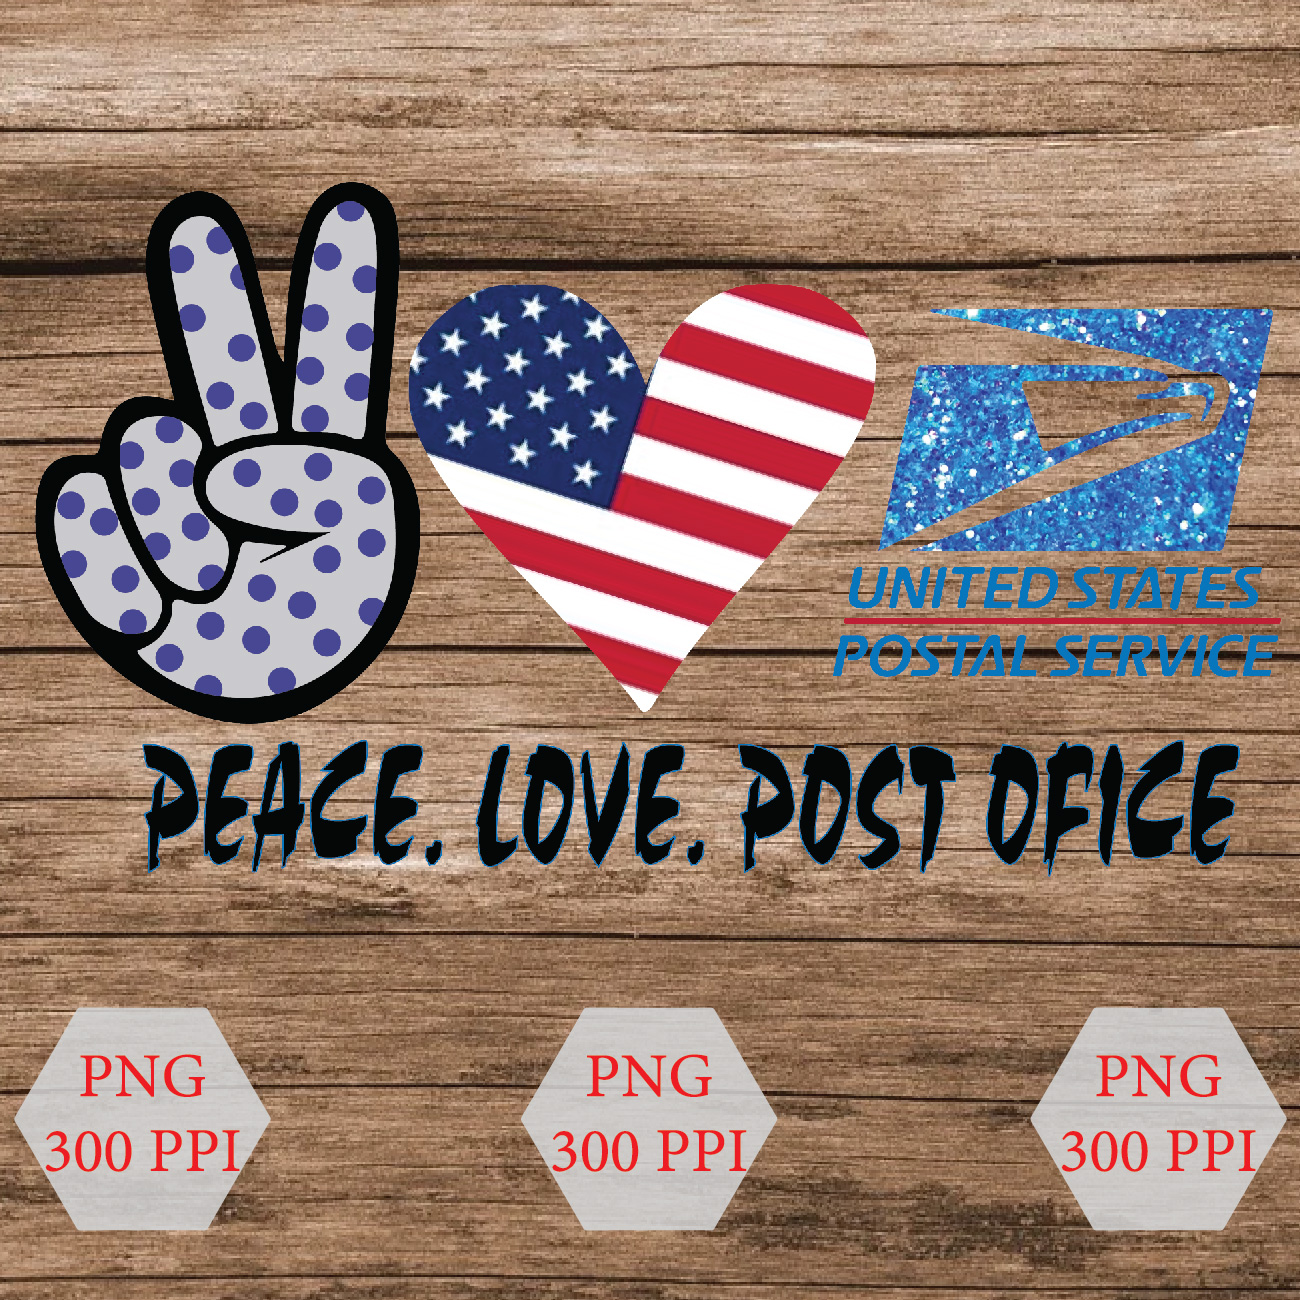 Download Peace Love POST OFFICE svg/ Peace love POst office png ...